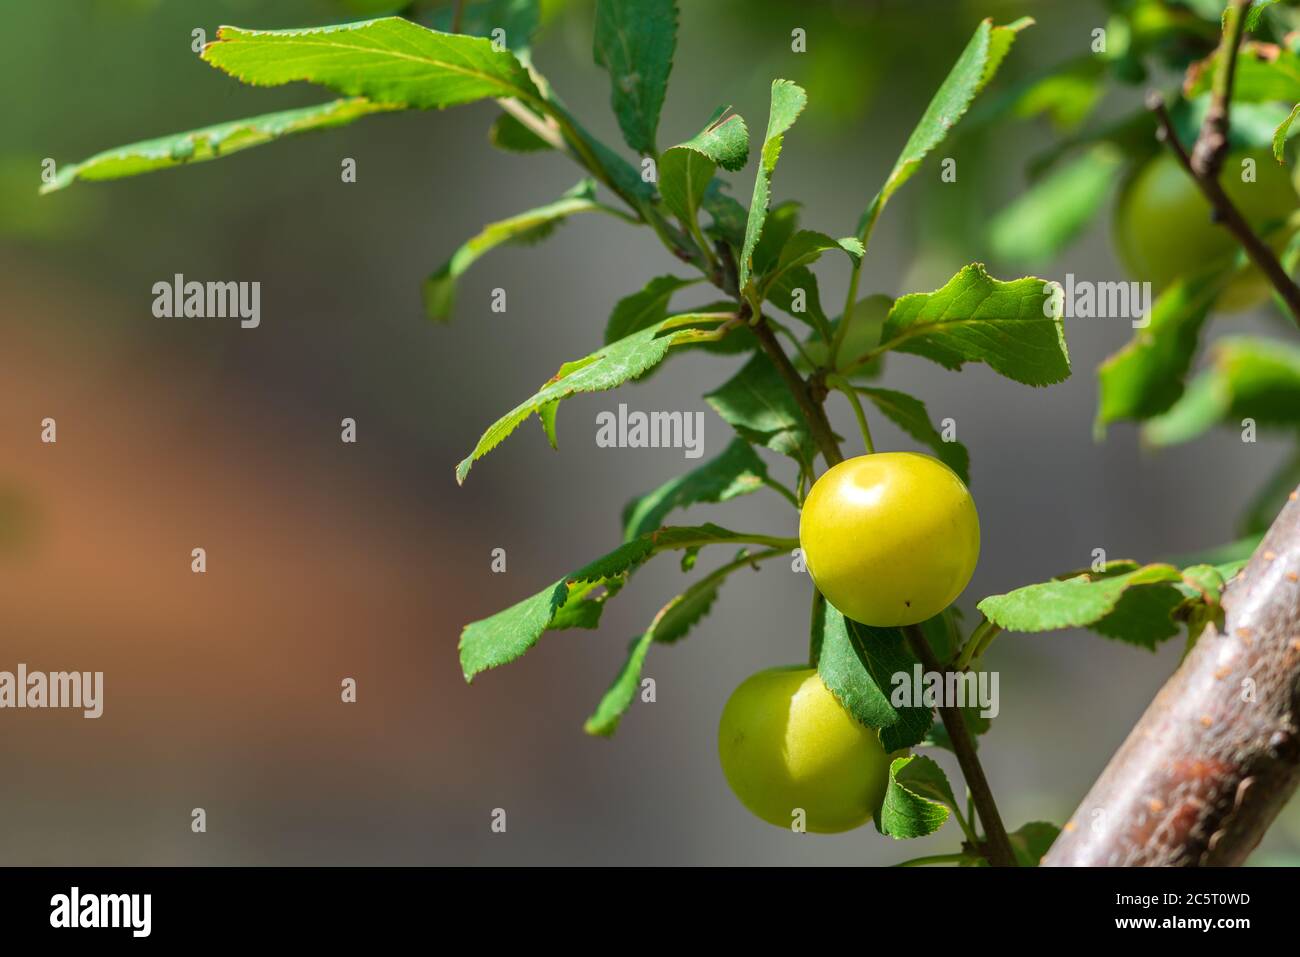 Ripening fruits of cherry plum on a branch Stock Photo